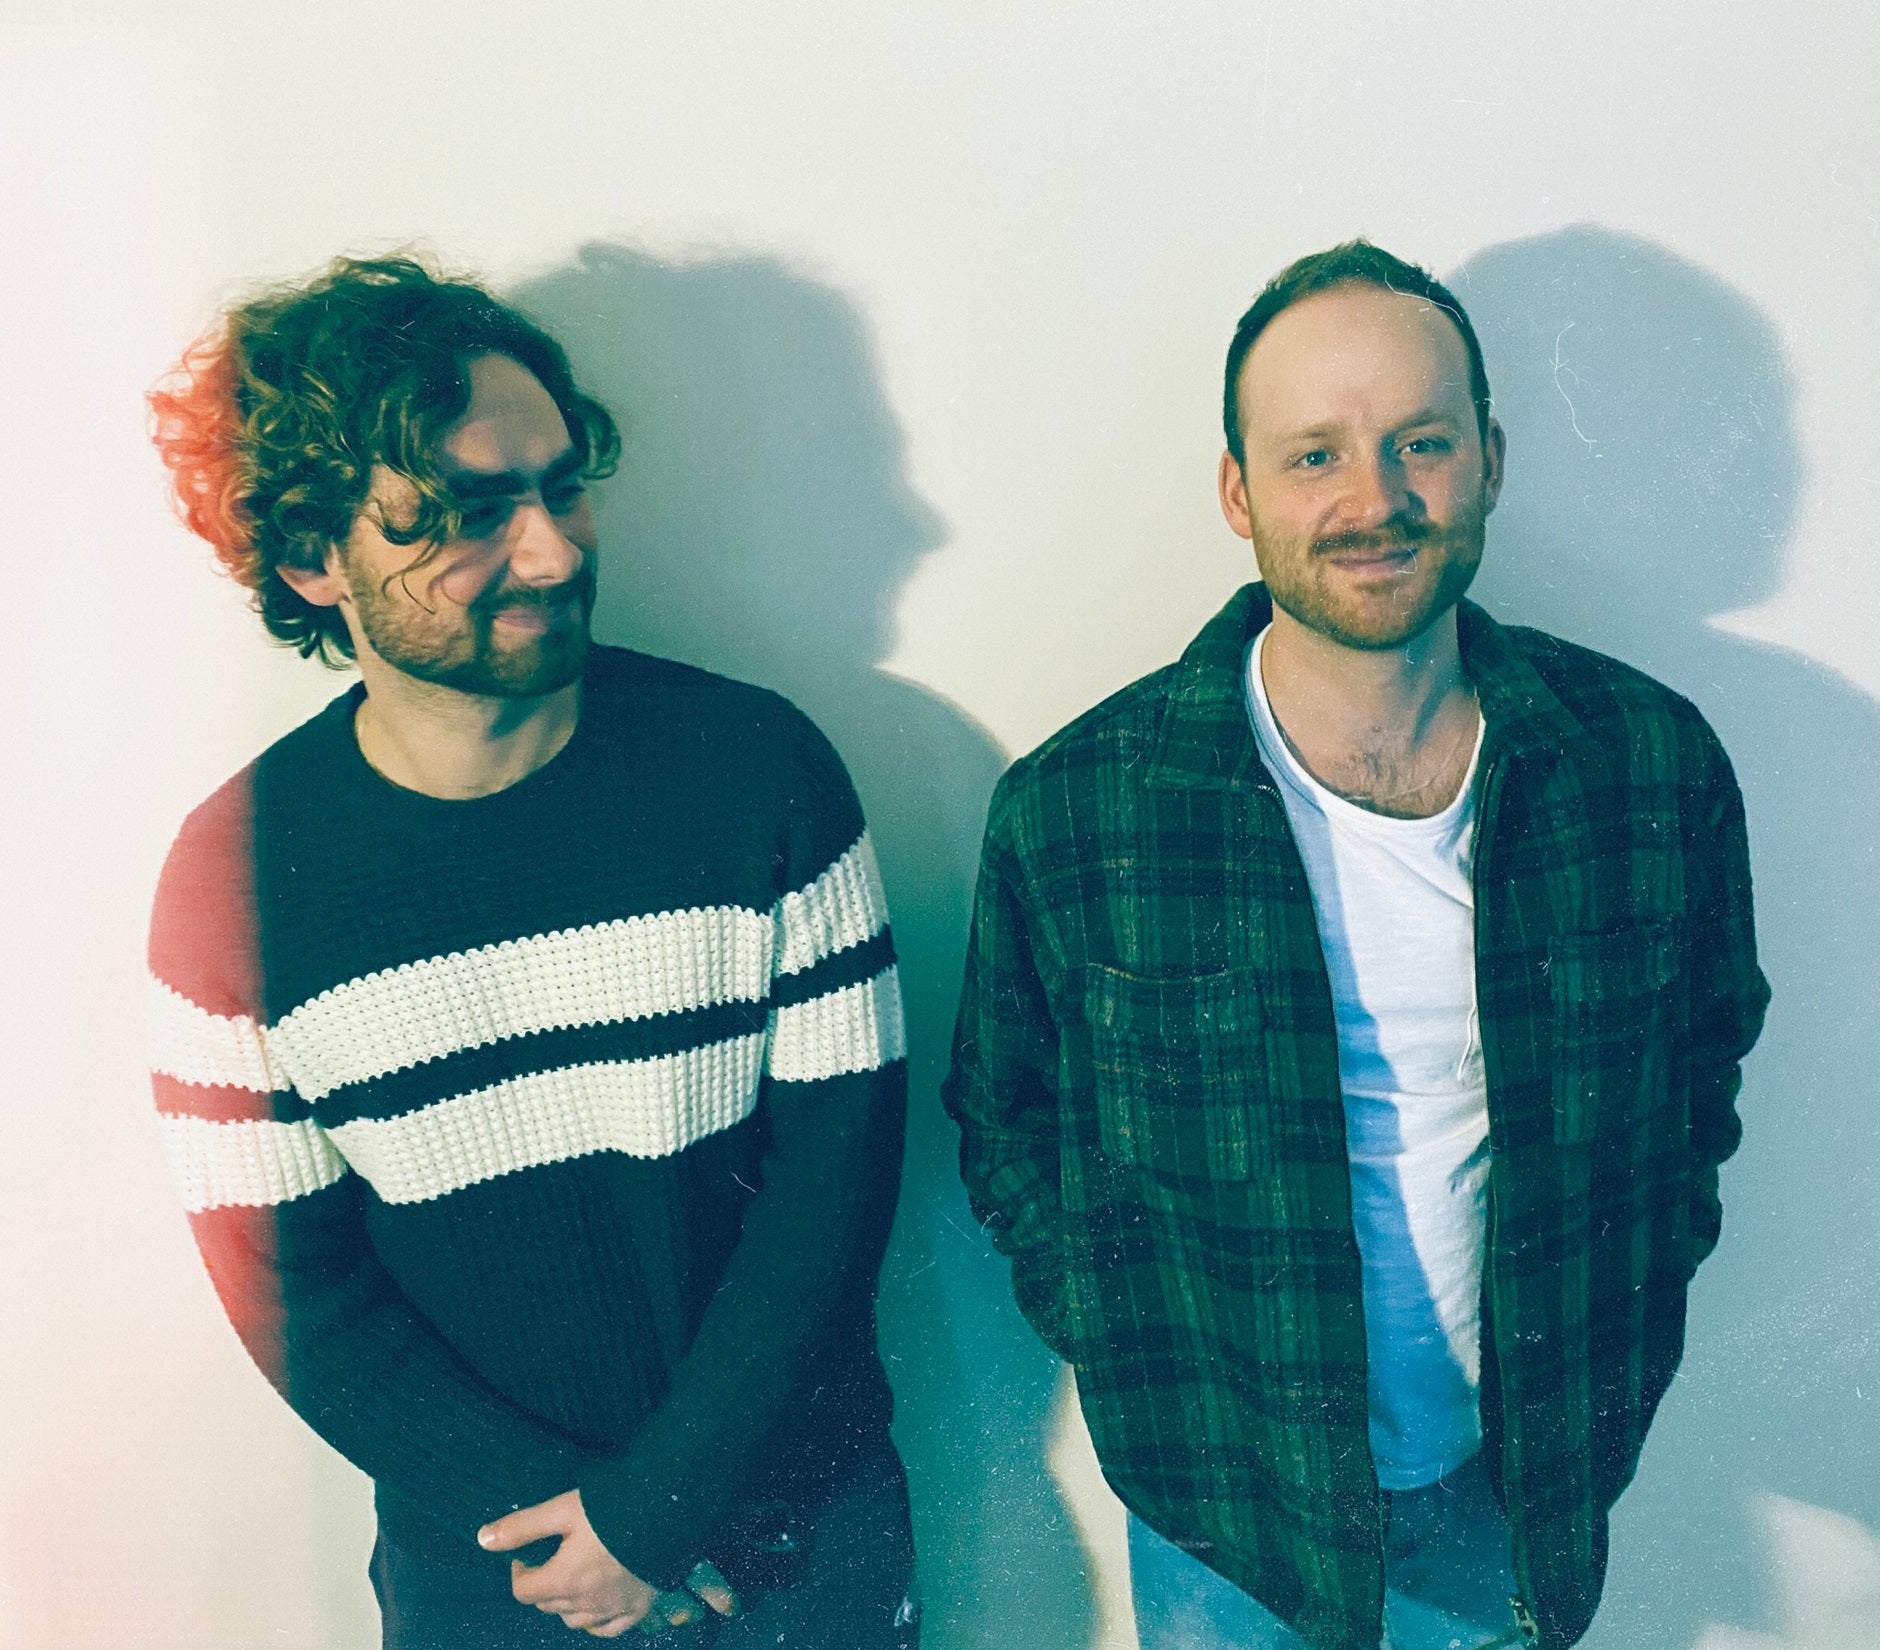 UK/Australian-based duo YONDER showcase their talents with new single ‘Fading Out’